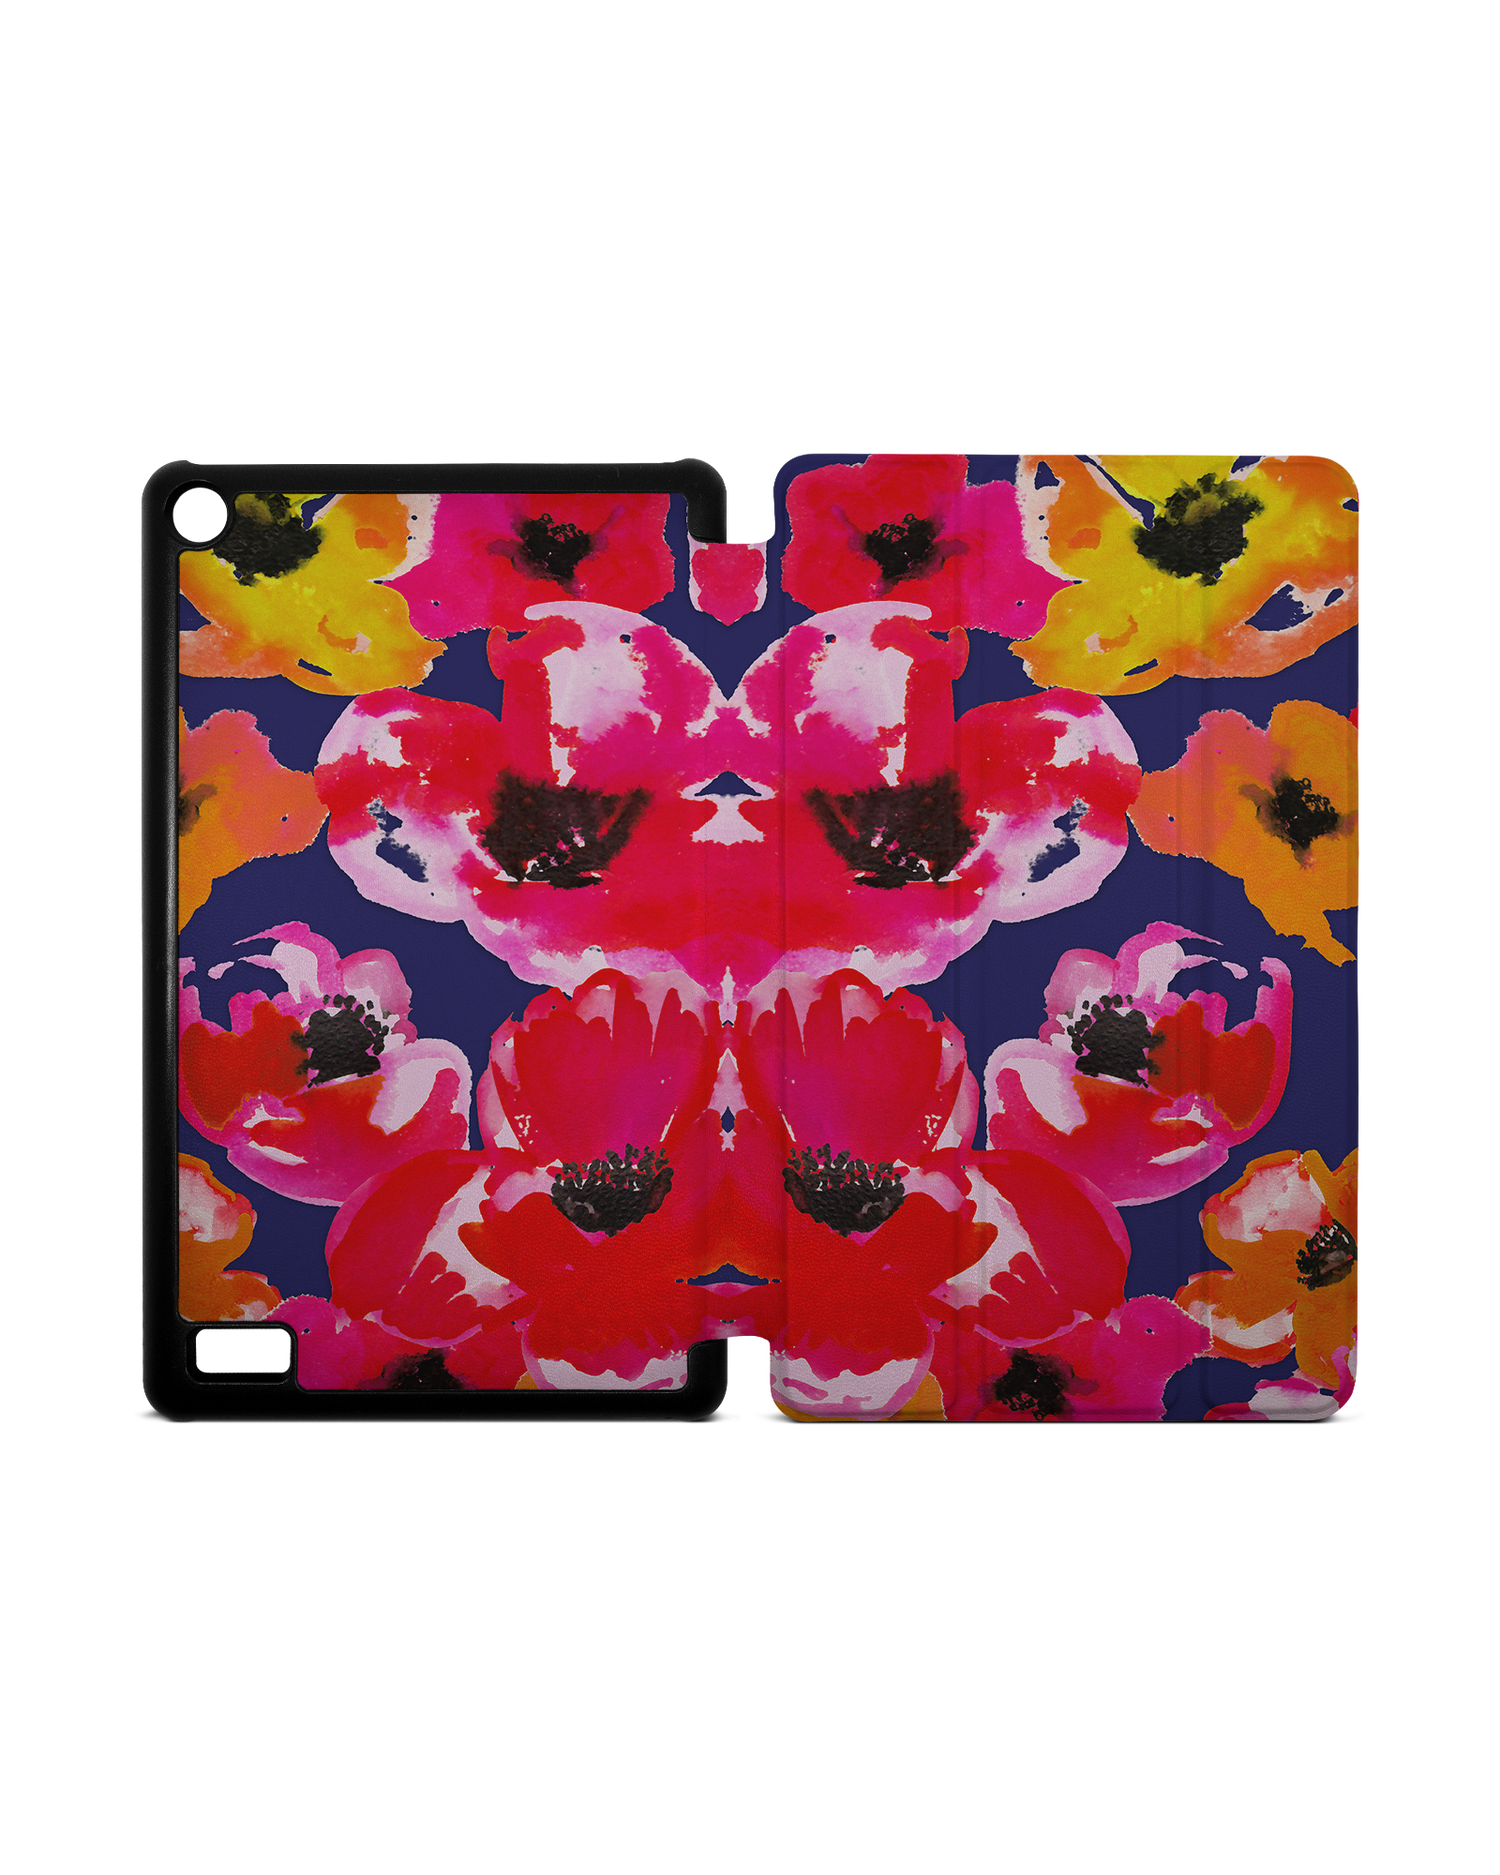 Painted Poppies Tablet Smart Case for Amazon Fire 7: Opened